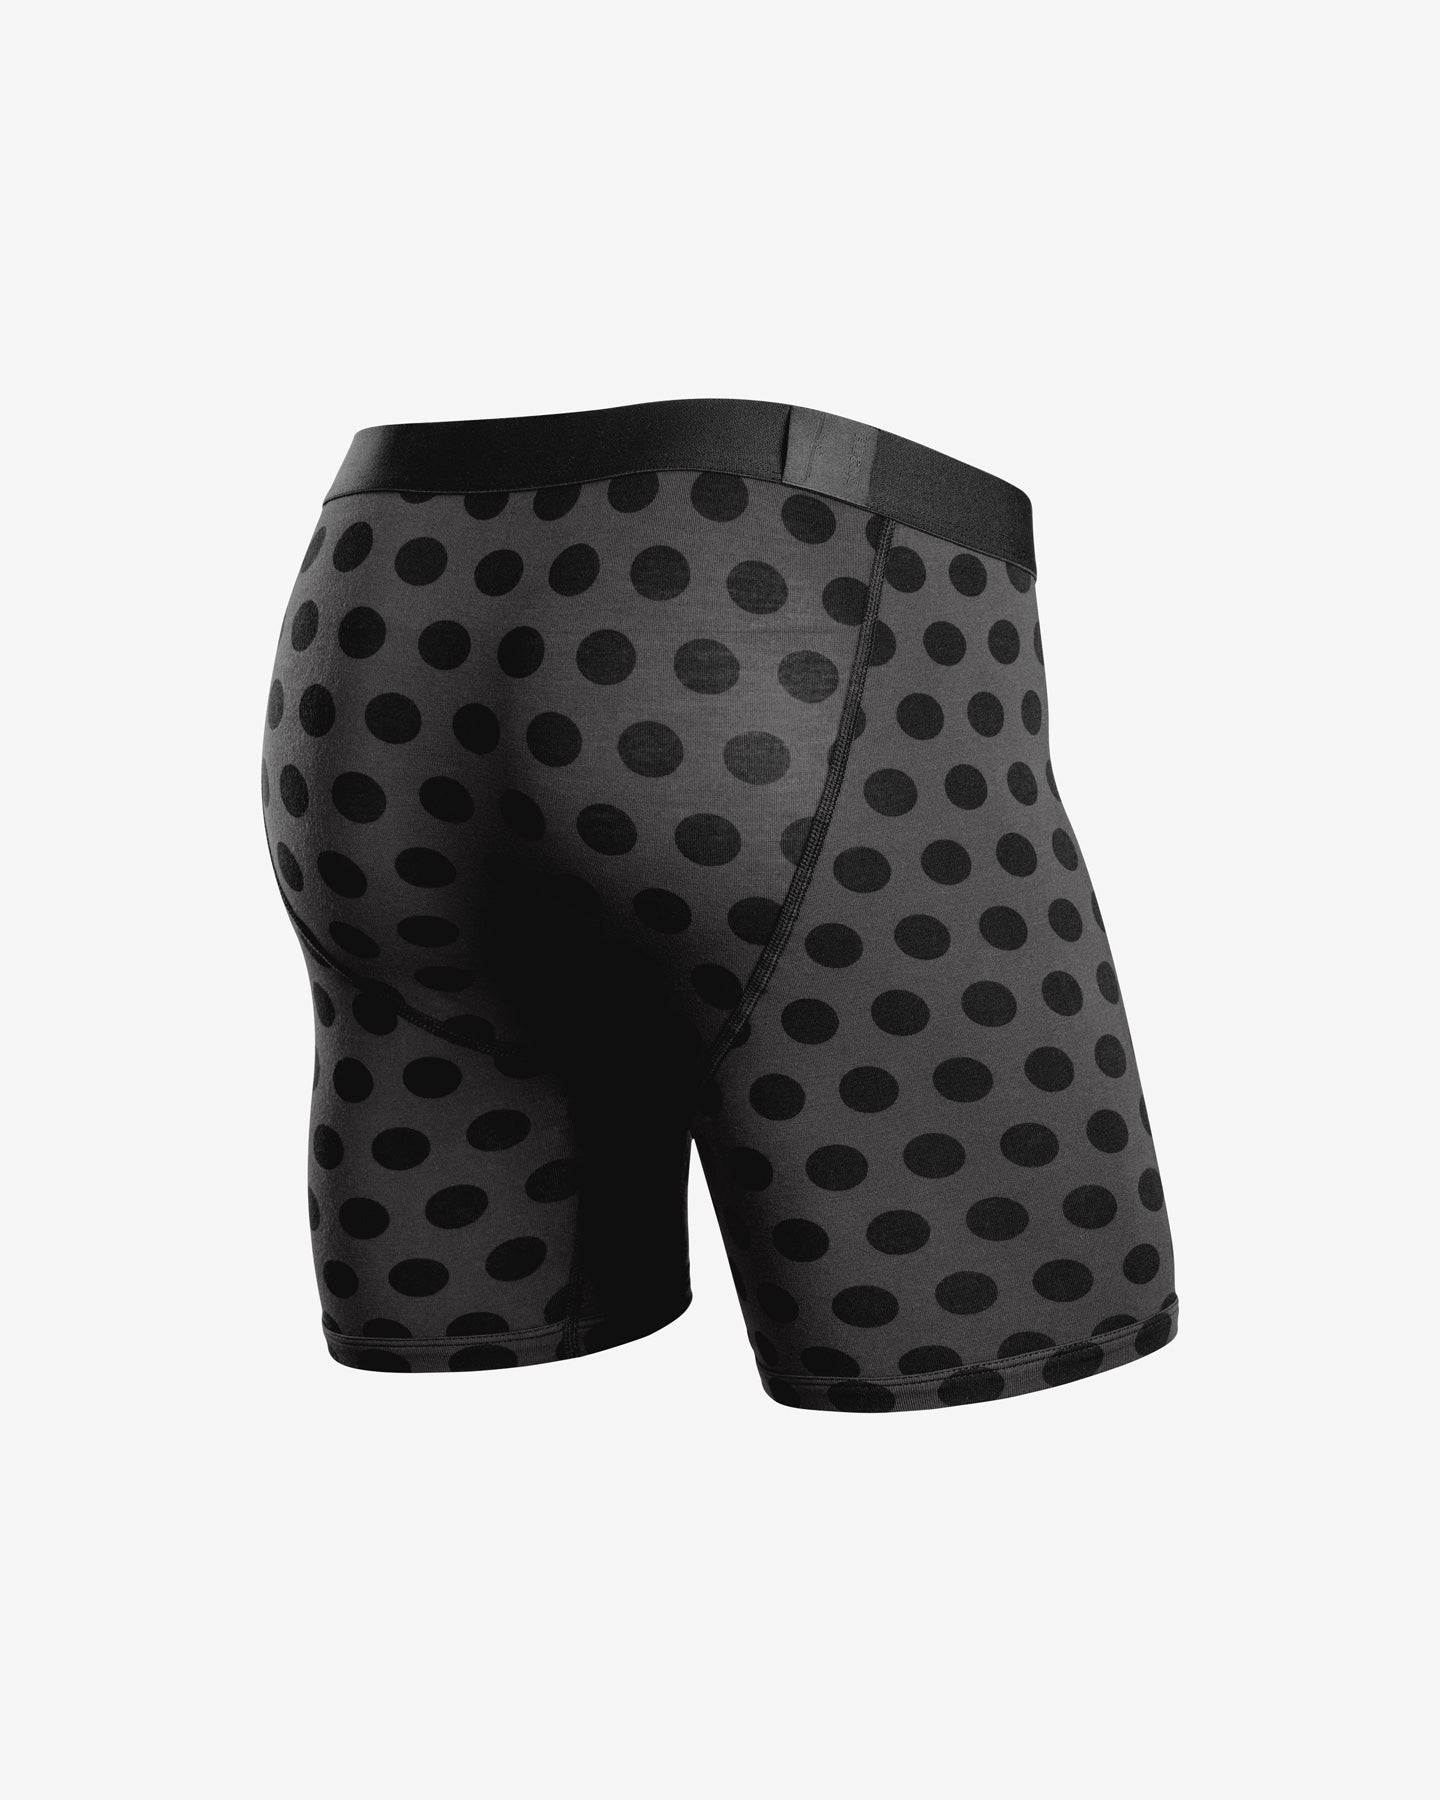 Polka Dot Boxer Briefs • Dirty Pink - On The Roam by Jason Momoa